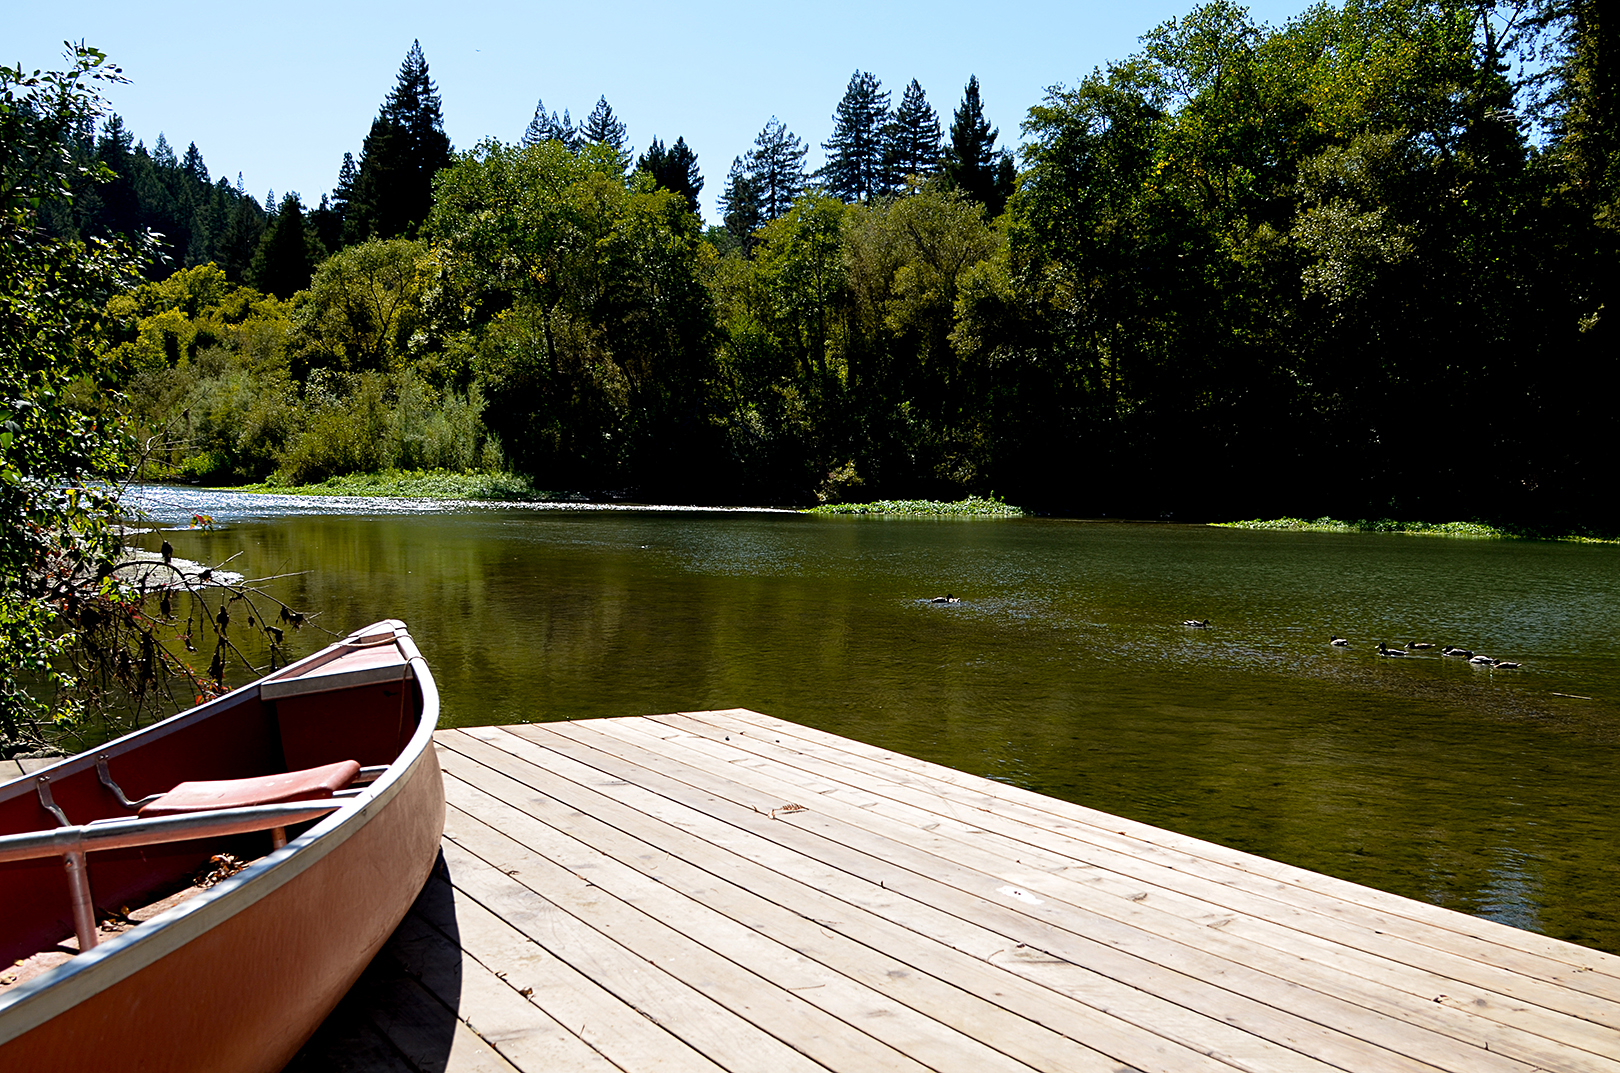 A serene view from the dock - secured year round, but available only when conditions are safe.